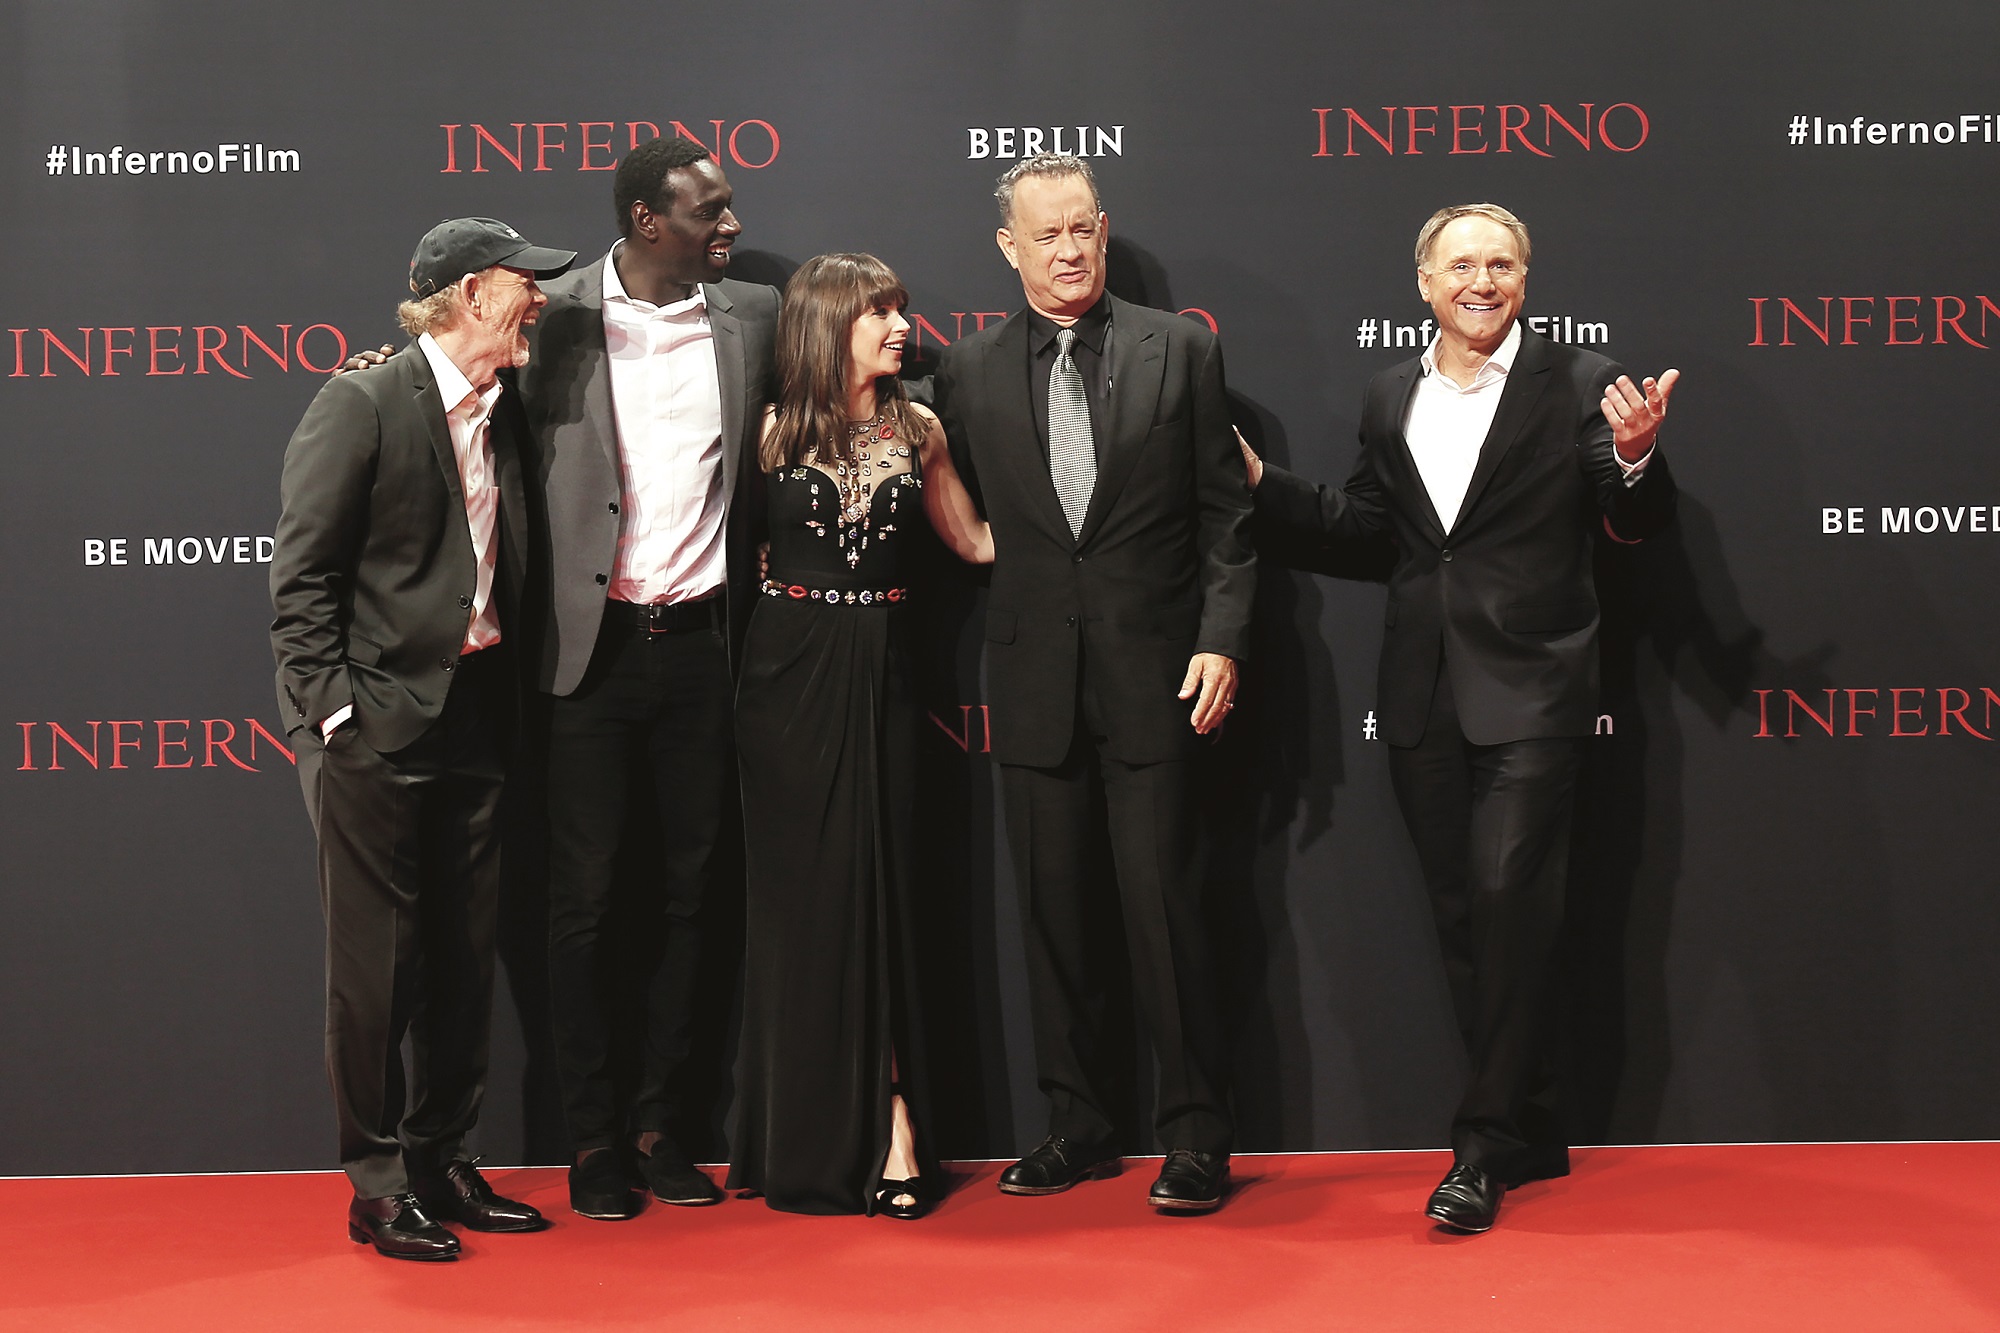 BERLIN, GERMANY - OCTOBER 10:  (L-R) US actor Ron Howard, french actor Omar Sy, british actress Felicity Jones, US actor Tom Hanks and US author Dan Brown attend the German premiere of the film 'INFERNO' at Sony Centre on October 10, 2016 in Berlin, Germany. (Photo by Isa Foltin/Getty Images for Sony Pictures)